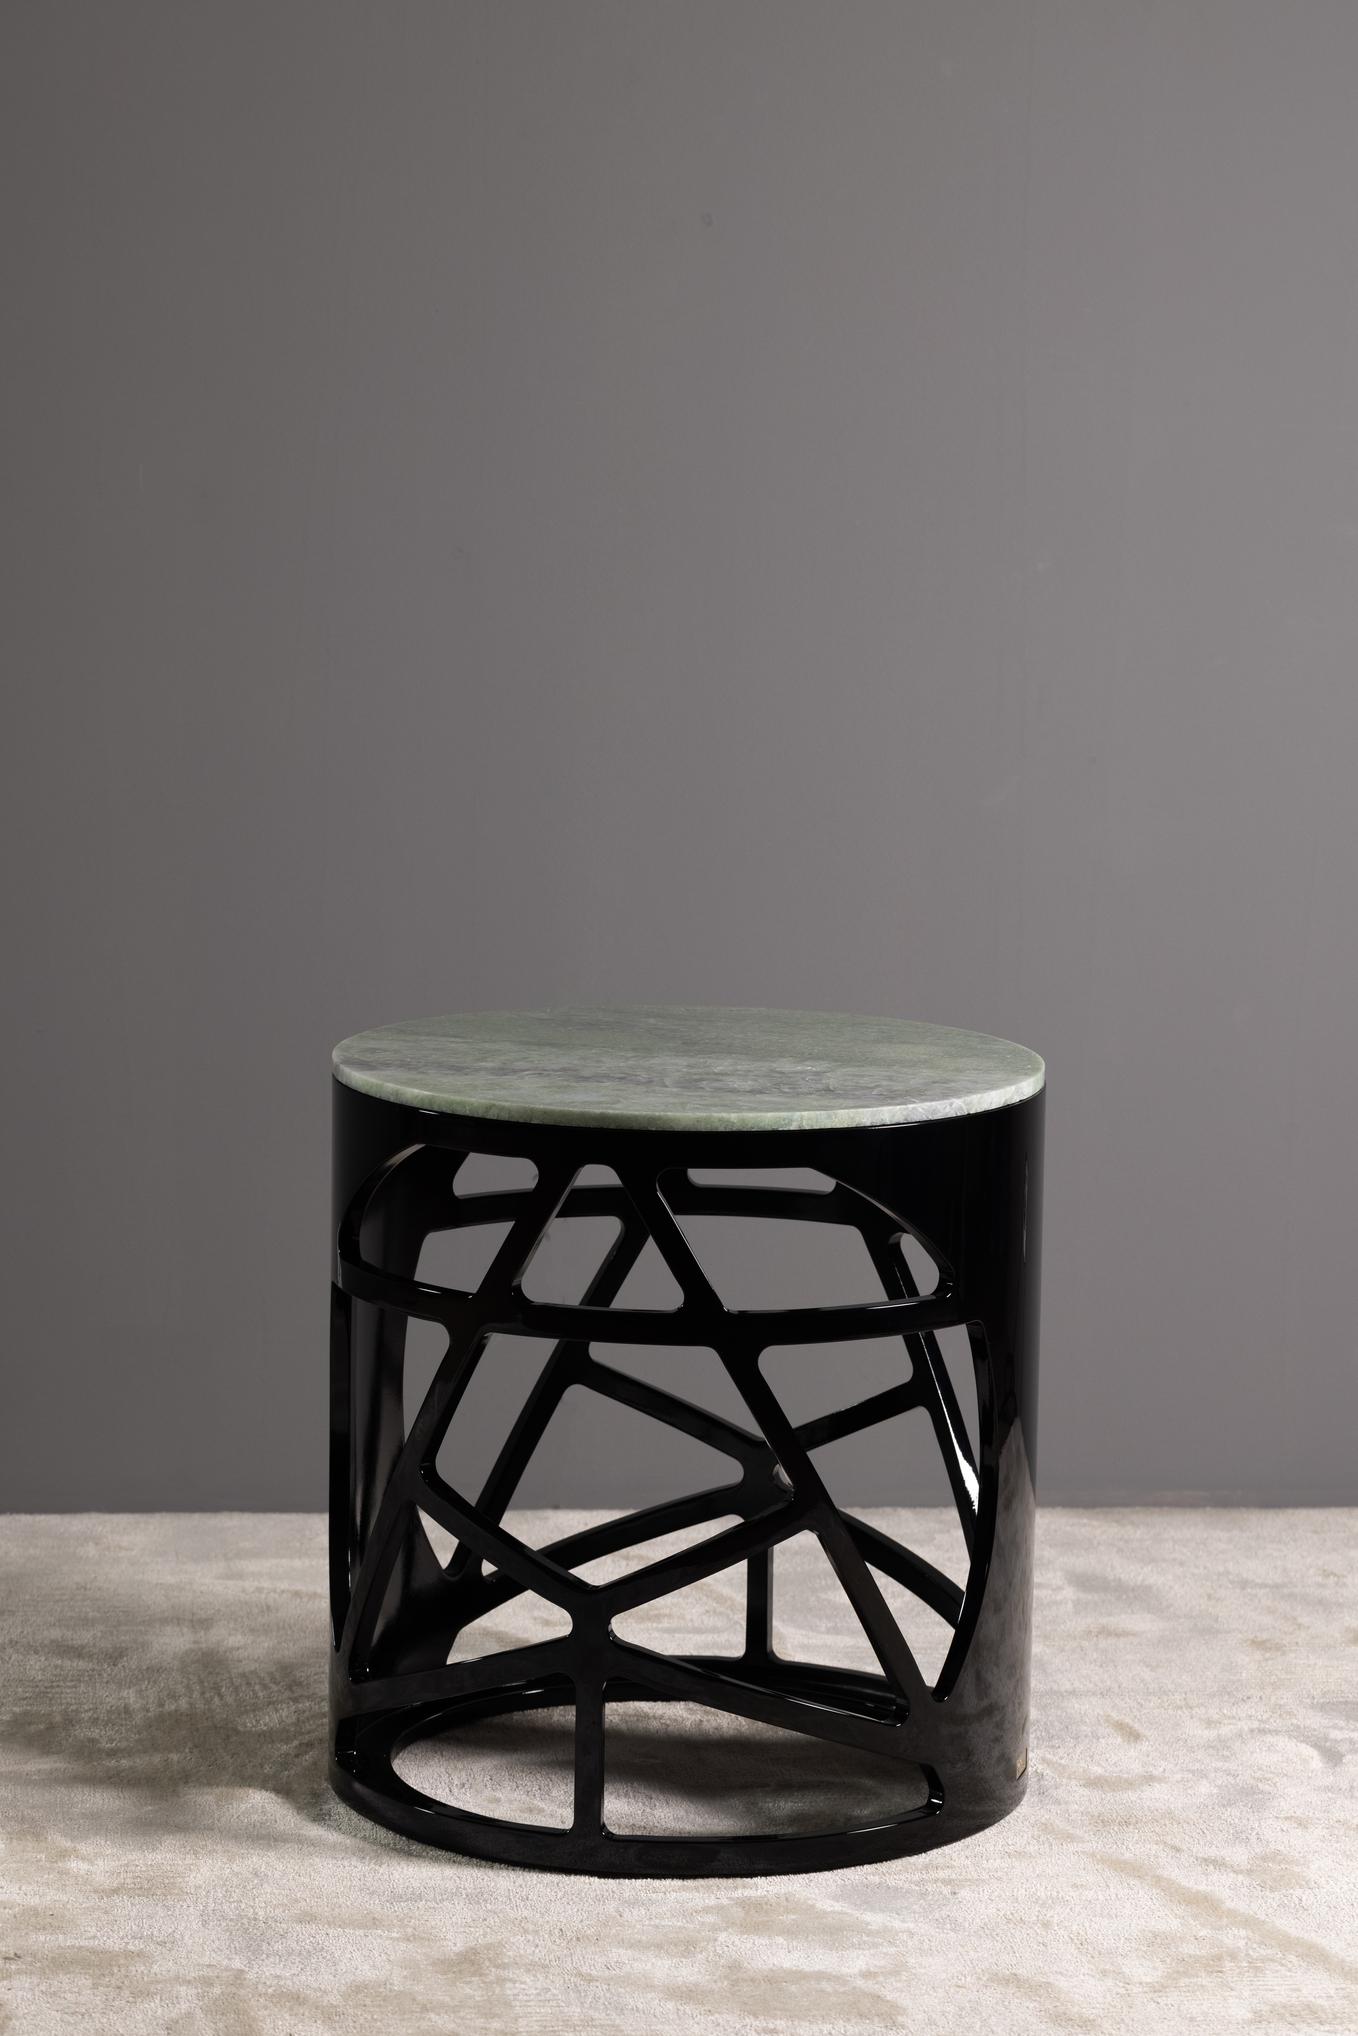 Art Deco Pyrite Side Table, Calacatta Marble, Handmade in Portugal by Greenapple For Sale 5